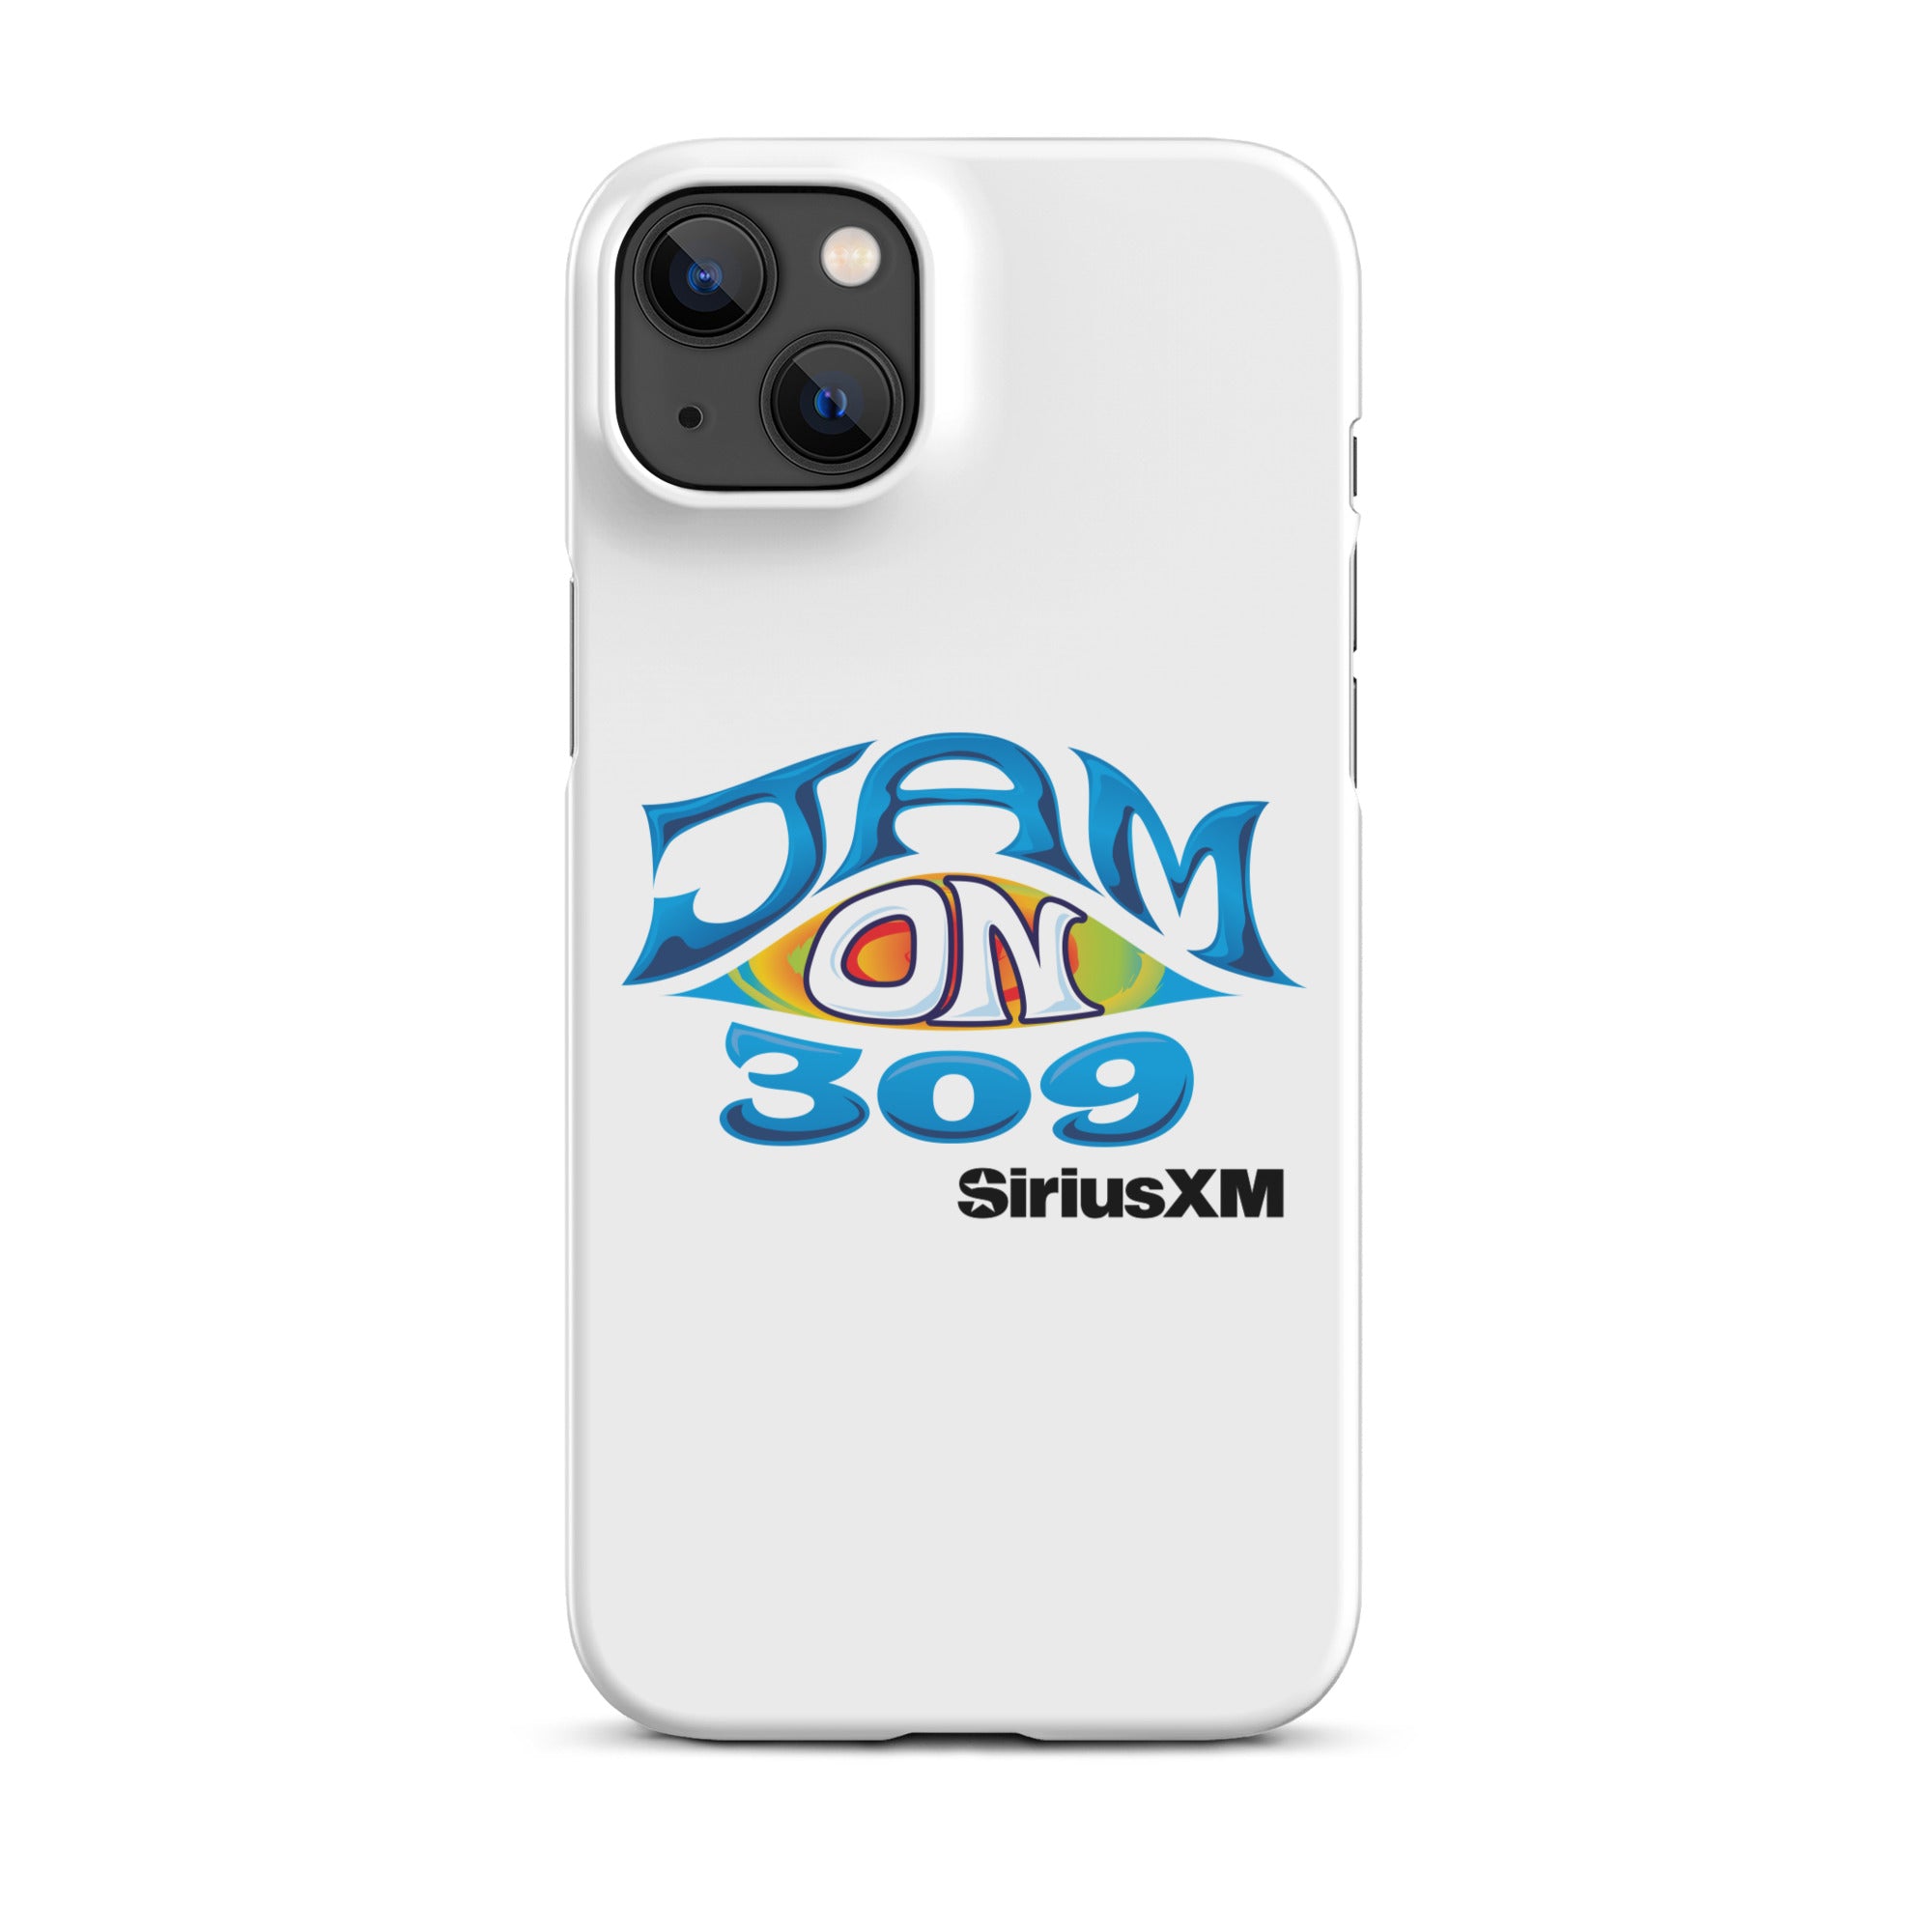 Jam on 309: iPhone® Snap Case